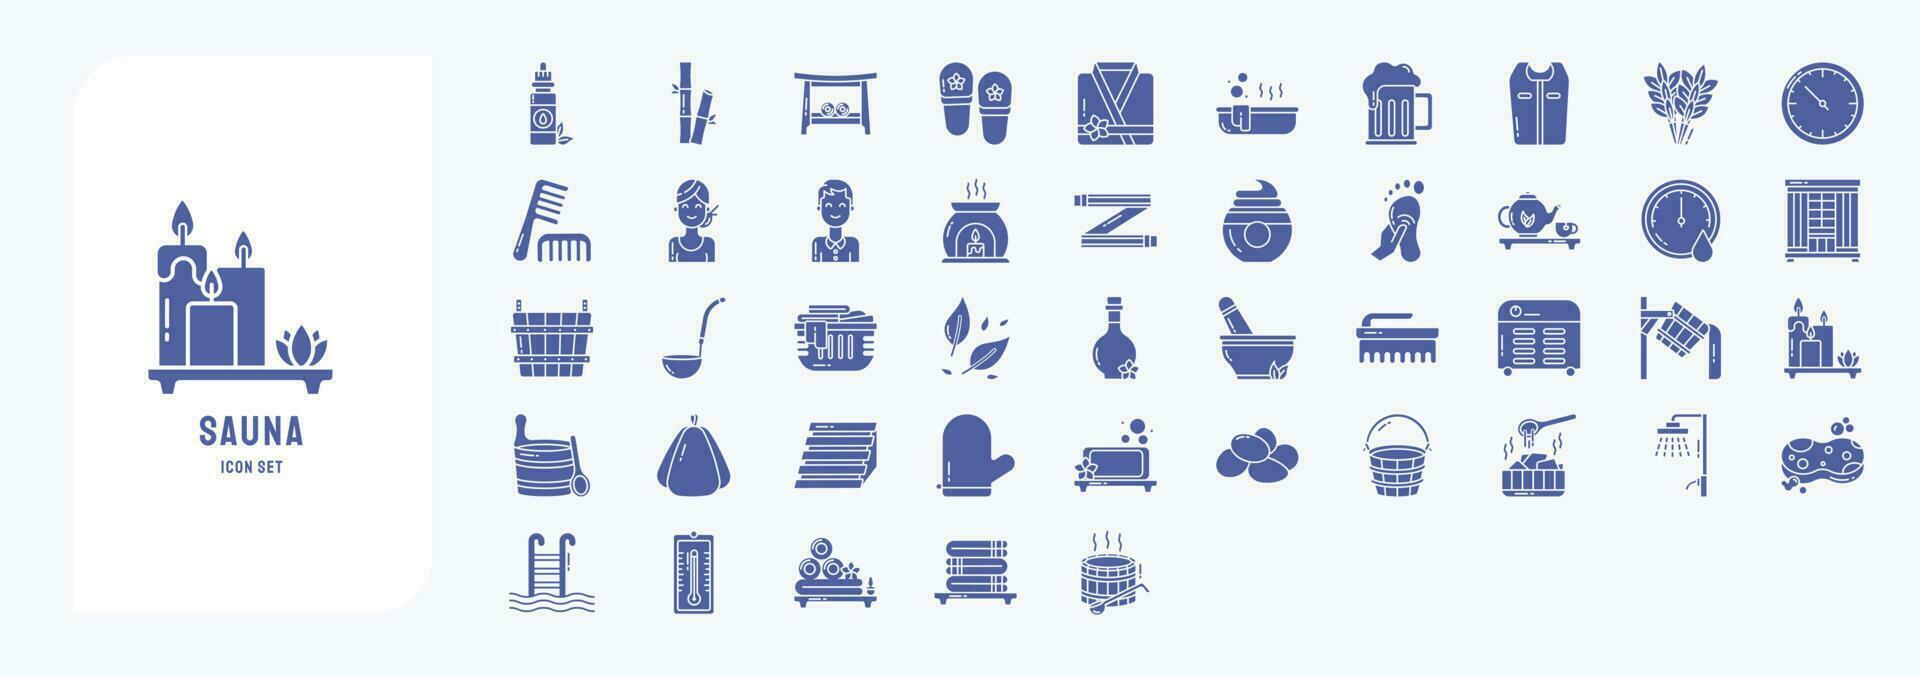 Collection of icons related to Sauna and spa, including icons like Bamboo, Bath Bench, Bathrobe, Bathtub and more vector